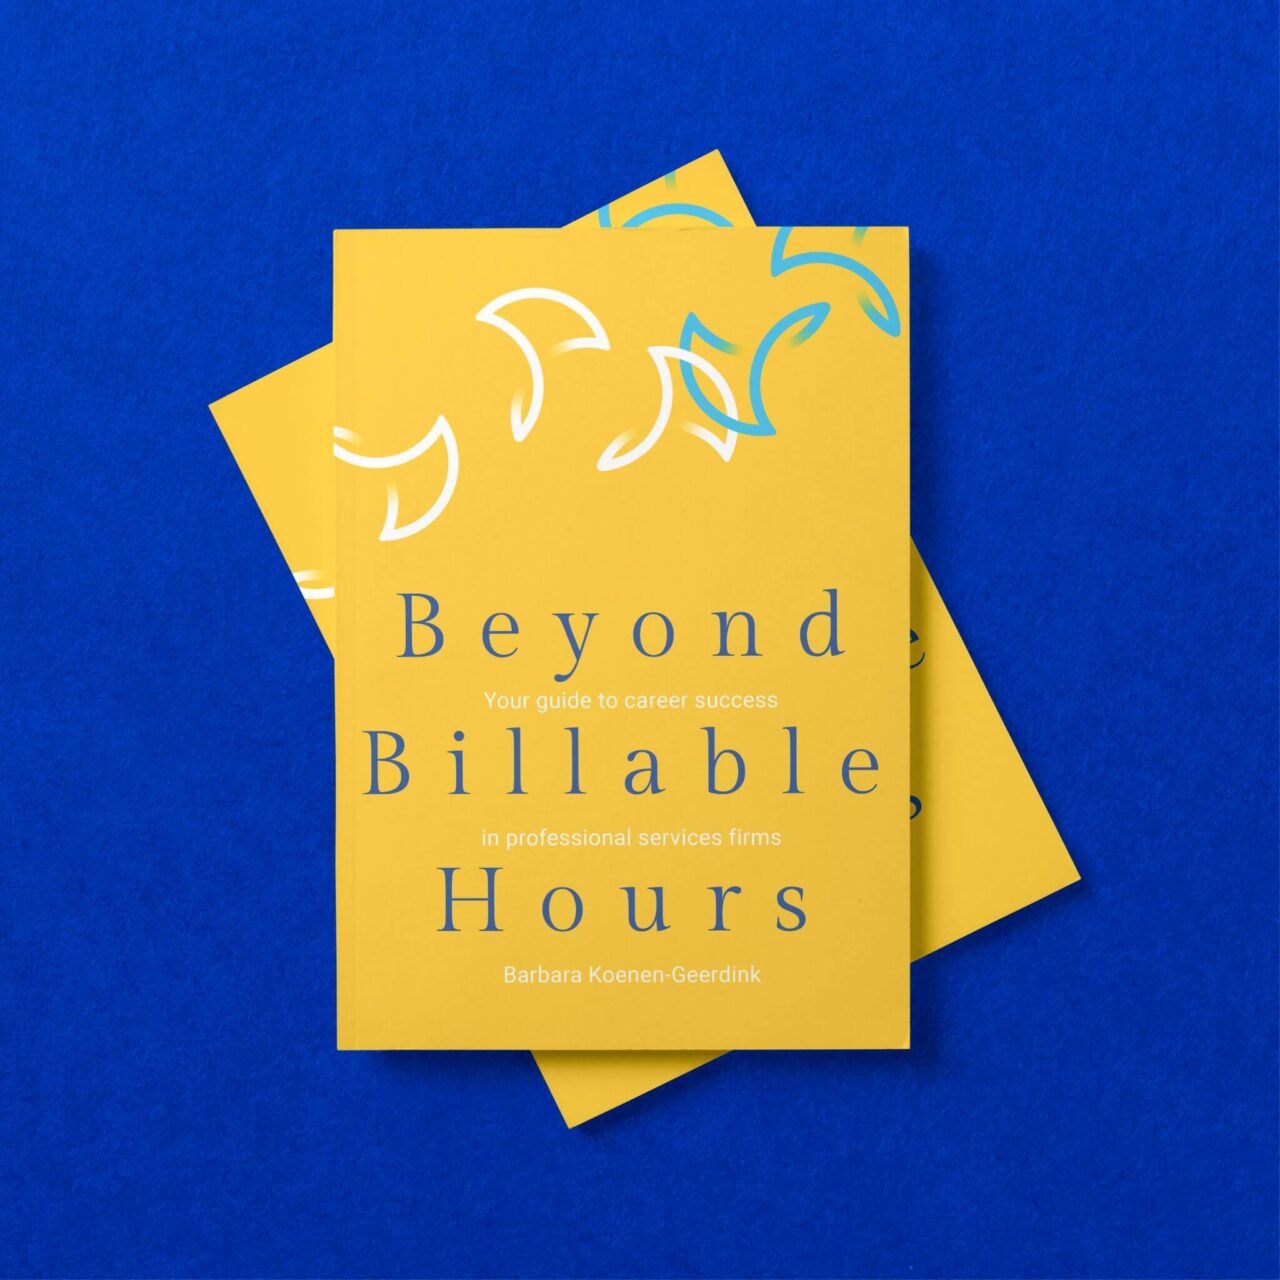 Beyond Billable Hours